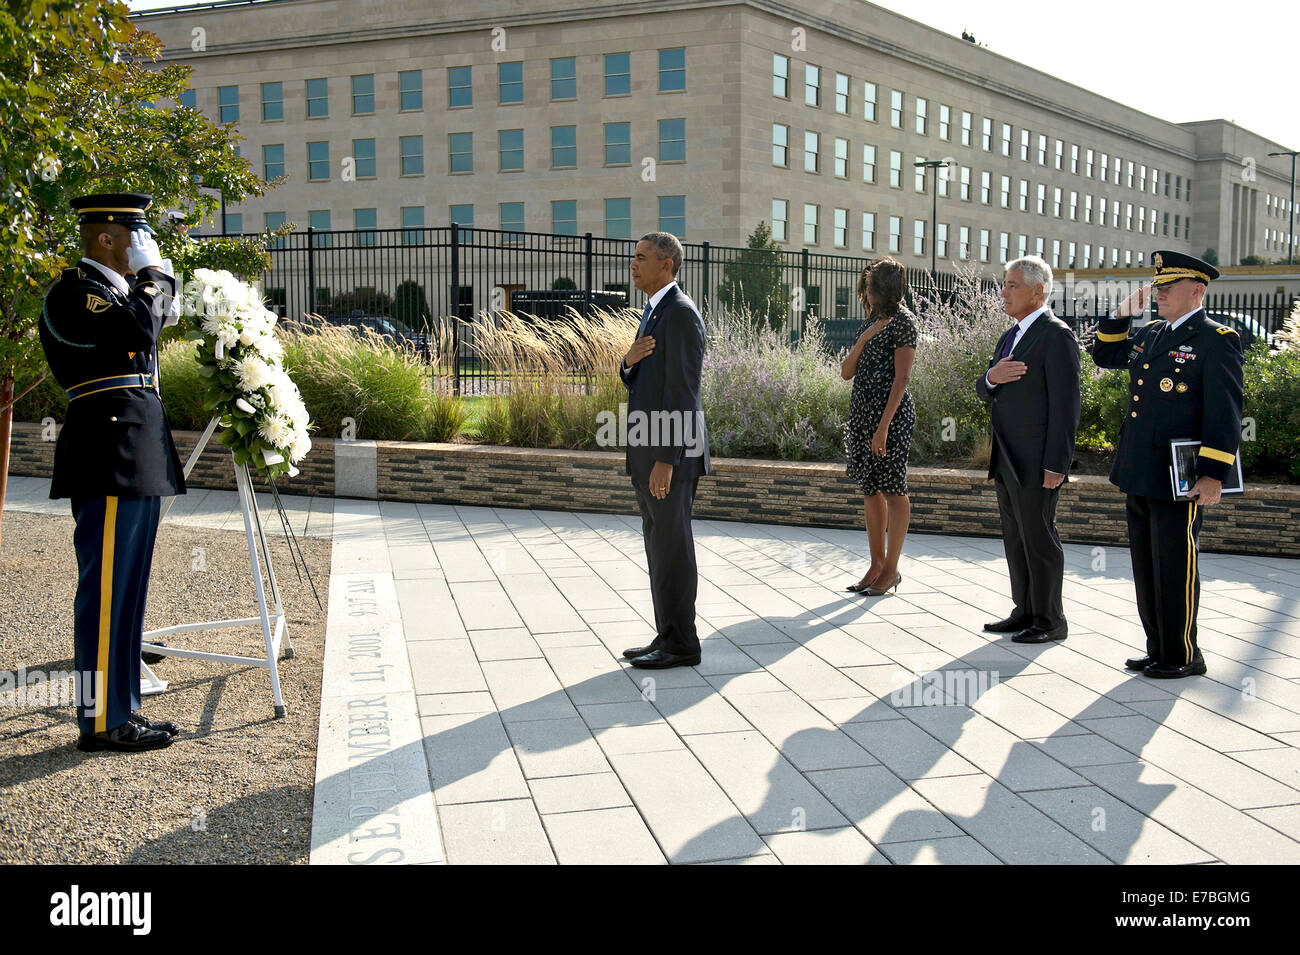 US President Barack Obama, First Lady Michelle Obama, Defense Secretary Chuck Hagel and Joint Chiefs Chairman General Martin Dempsey pay respects after placing a wreath in honor of the victims during the anniversary commemoration of the 9/11 terrorist attacks at the Pentagon September 11, 2014 in Arlington, Virginia. Stock Photo